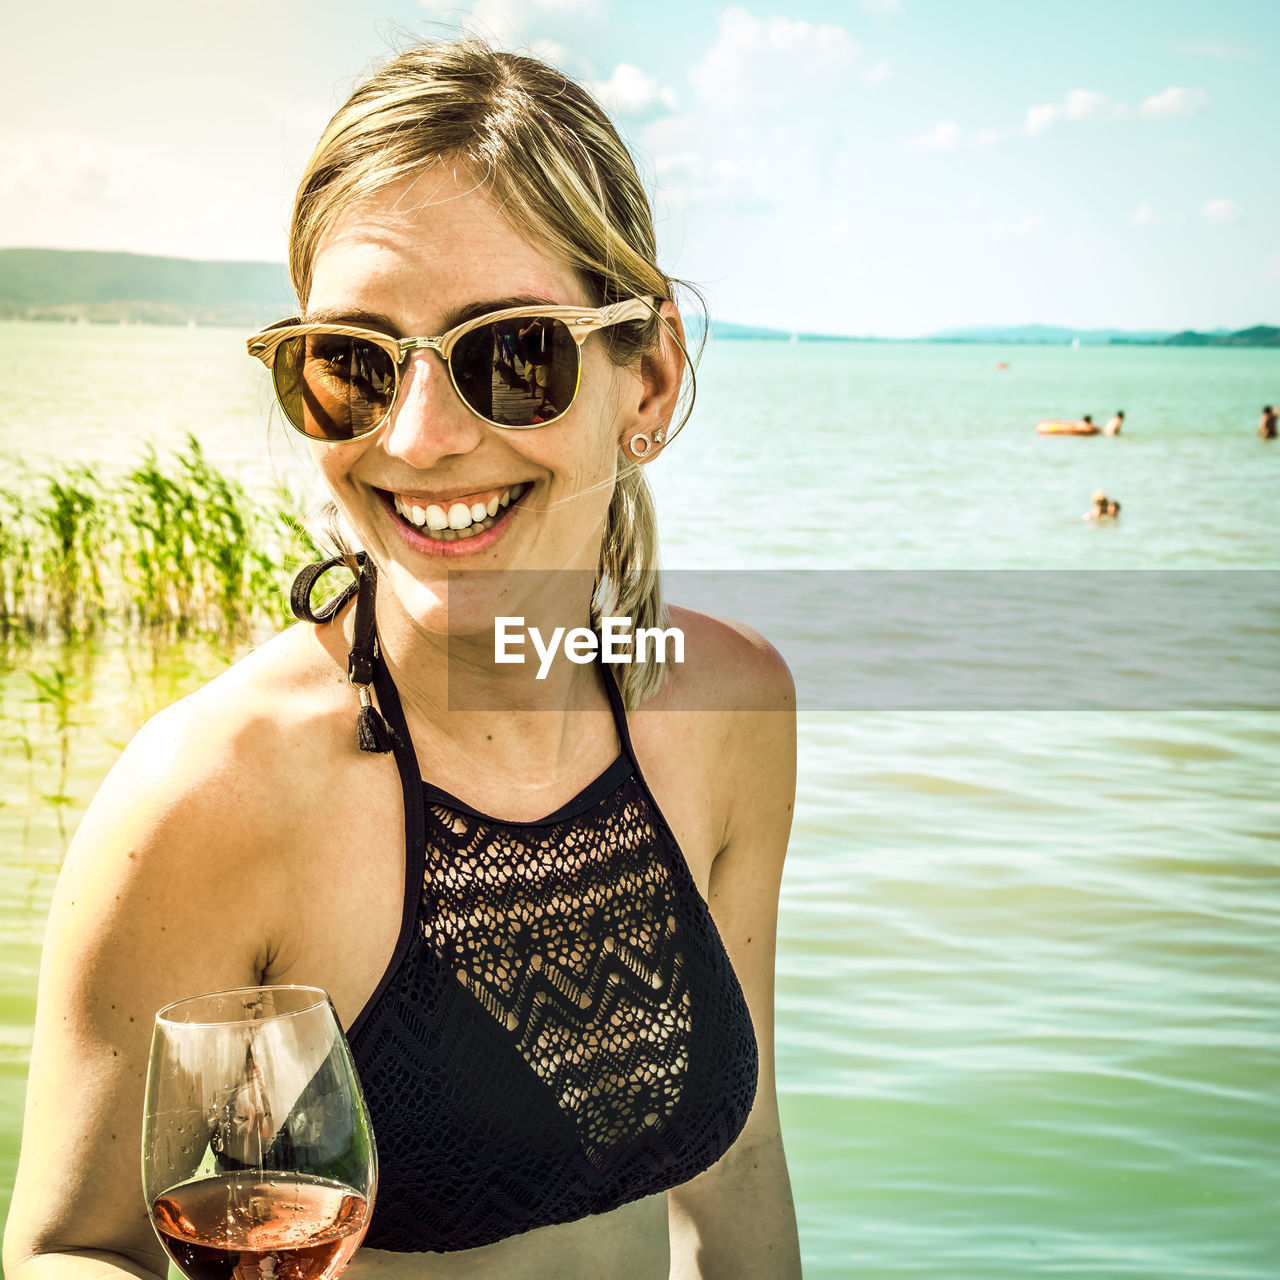 Portrait of smiling young woman wearing sunglasses against lake